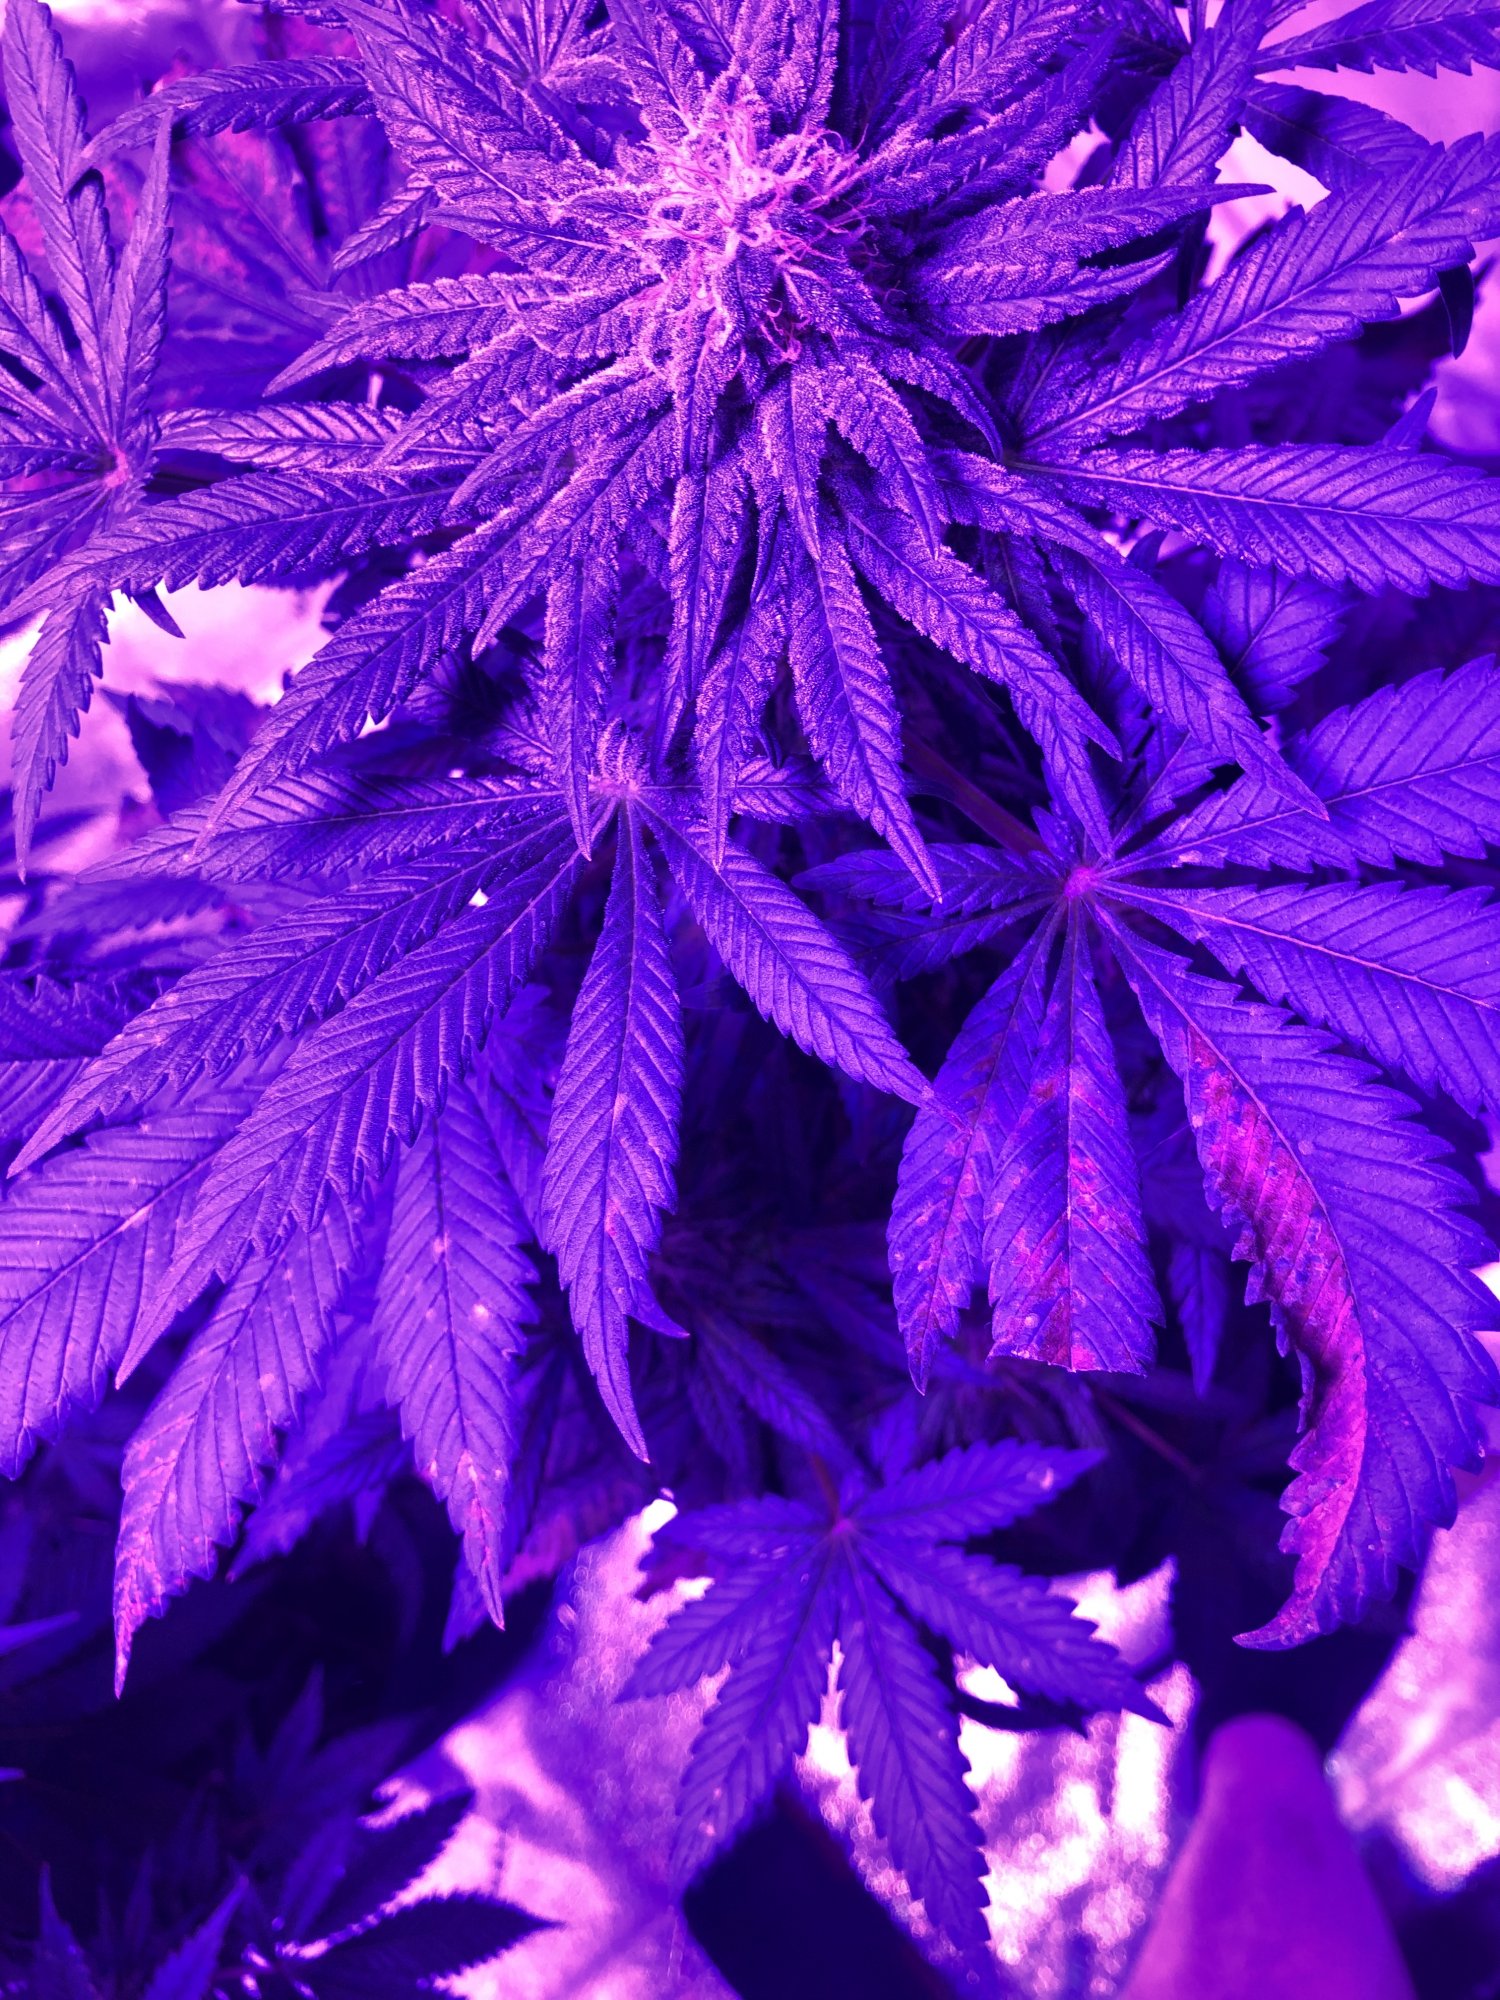 Cloning and nute burn 12